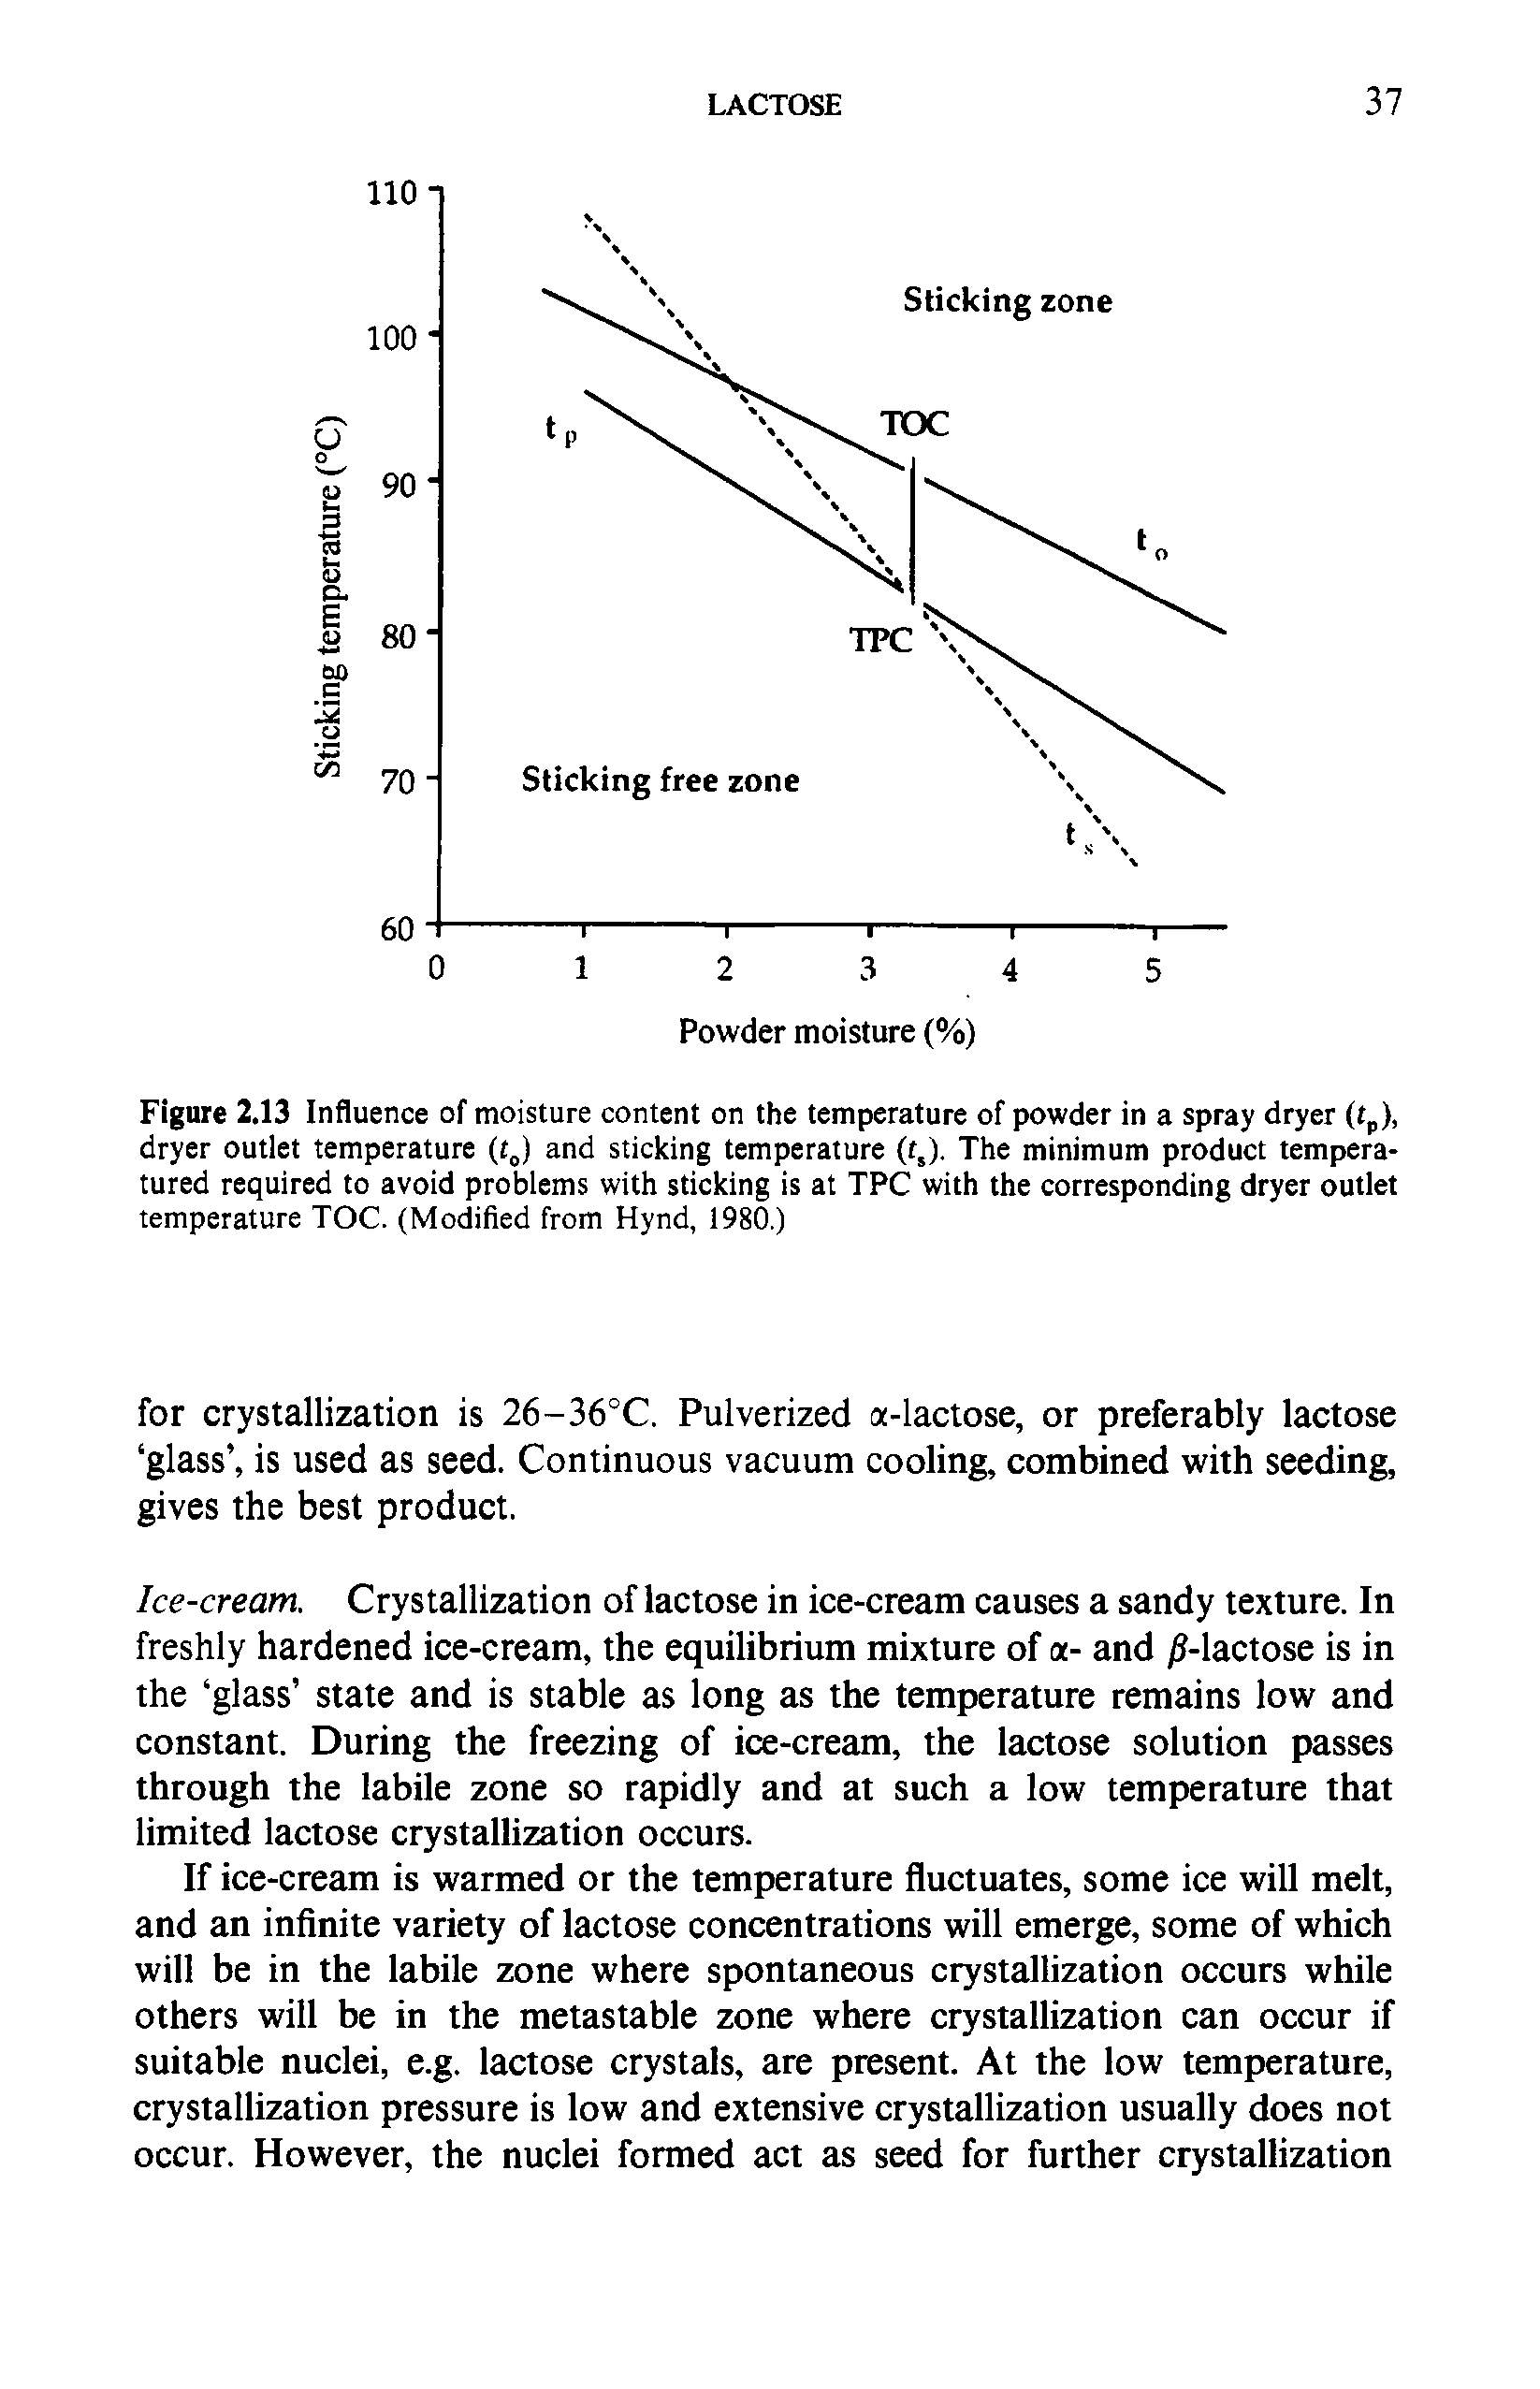 Figure 2.13 Influence of moisture content on the temperature of powder in a spray dryer (tp), dryer outlet temperature (f0) and sticking temperature (rs). The minimum product tempera-tured required to avoid problems with sticking is at TPC with the corresponding dryer outlet temperature TOC. (Modified from Hynd, 1980.)...